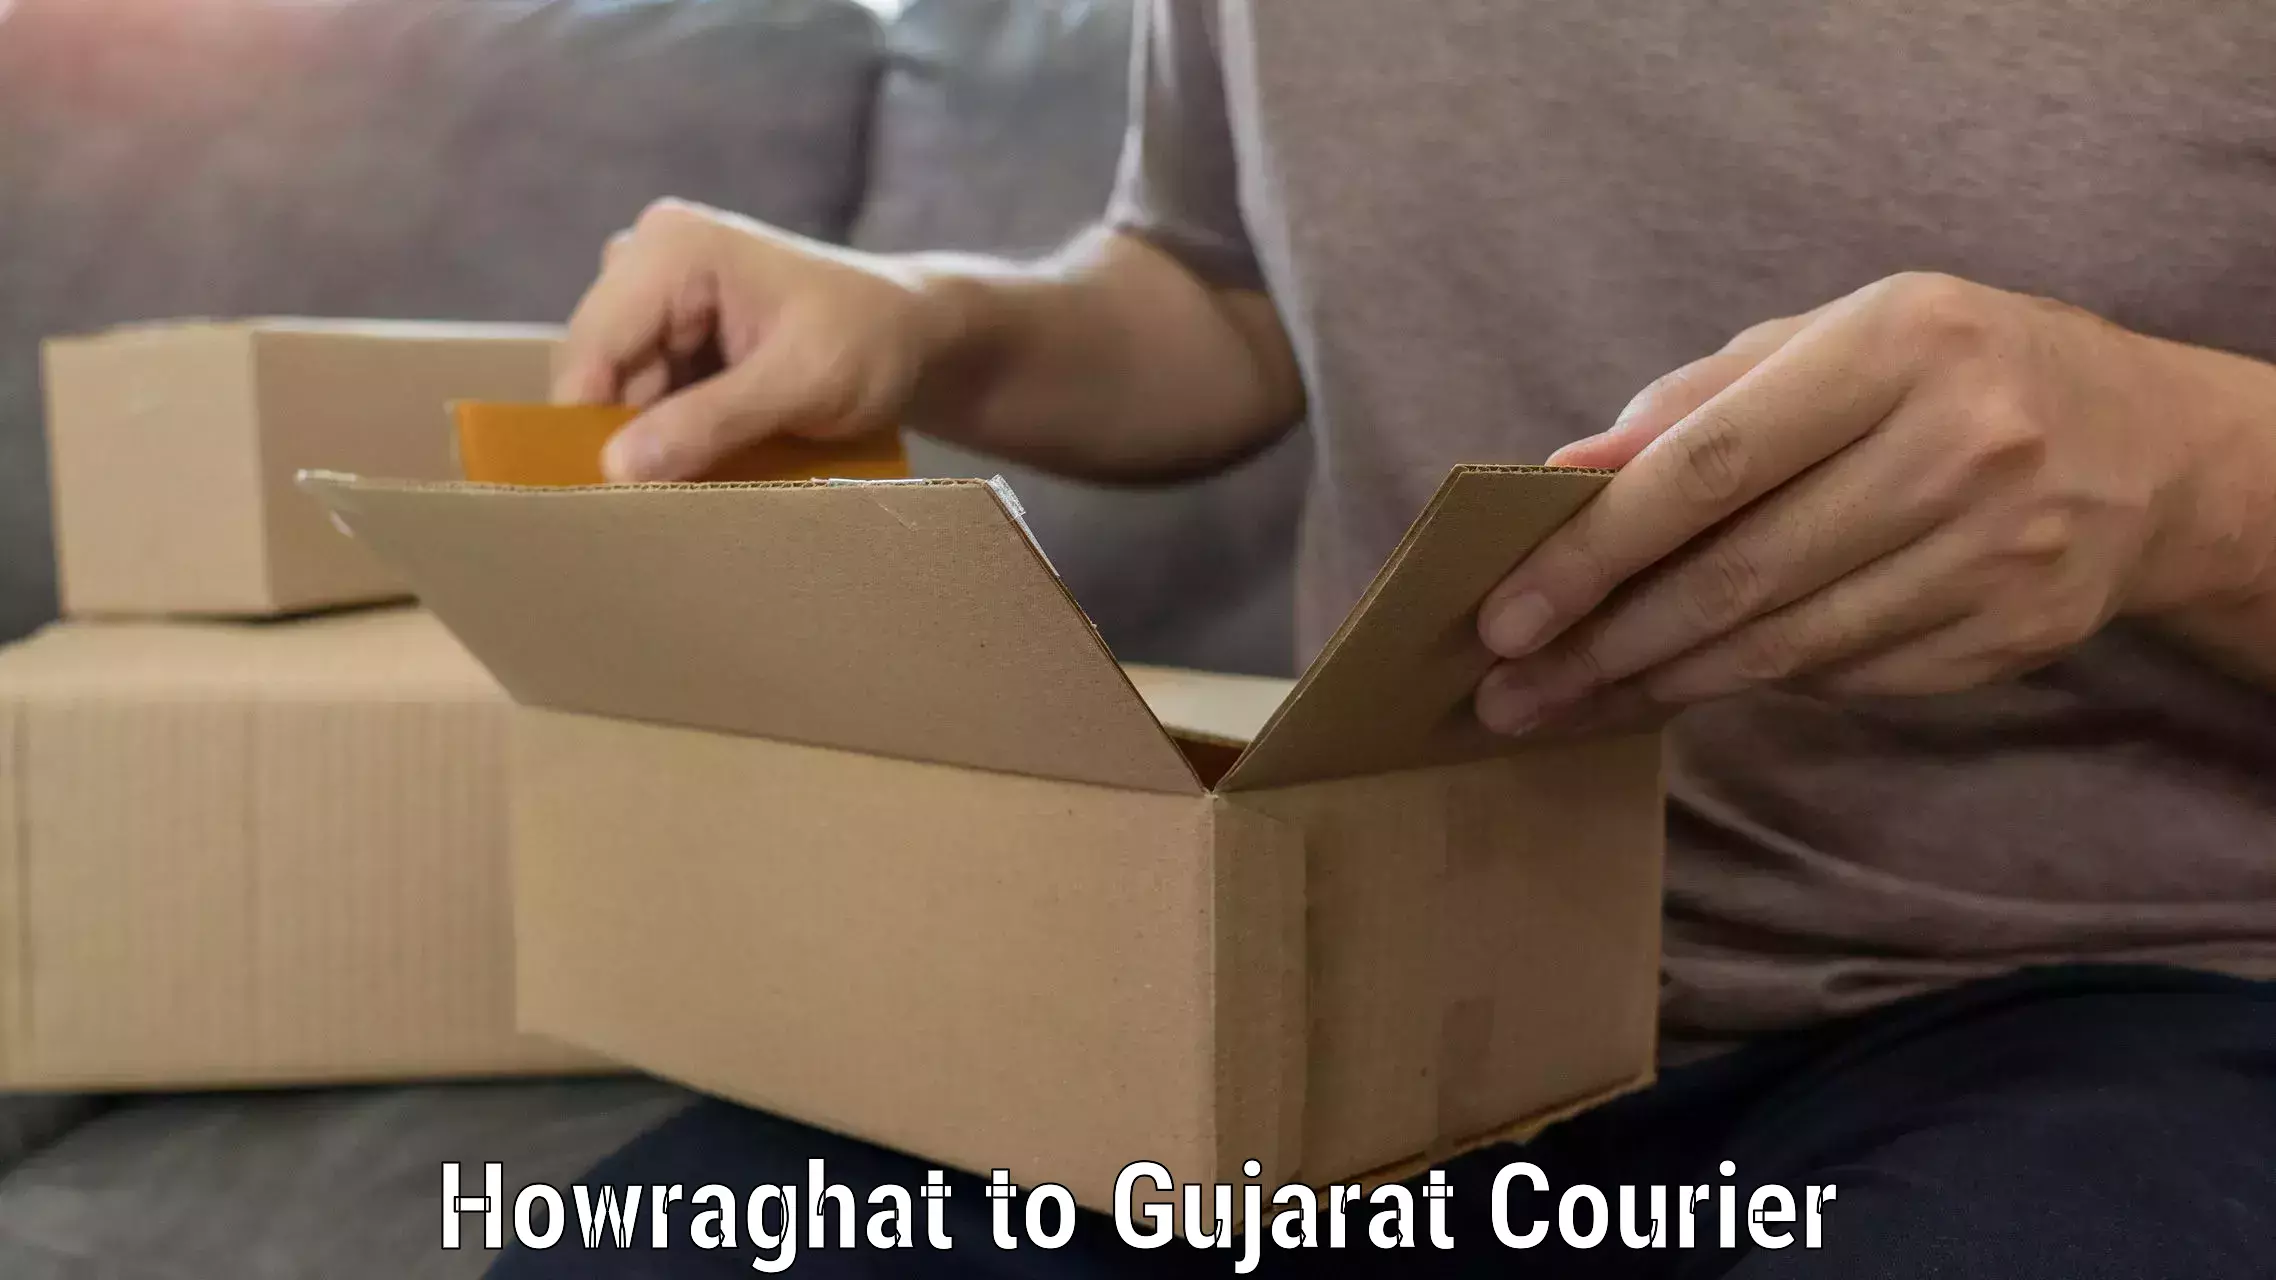 Professional packing and transport Howraghat to Surat